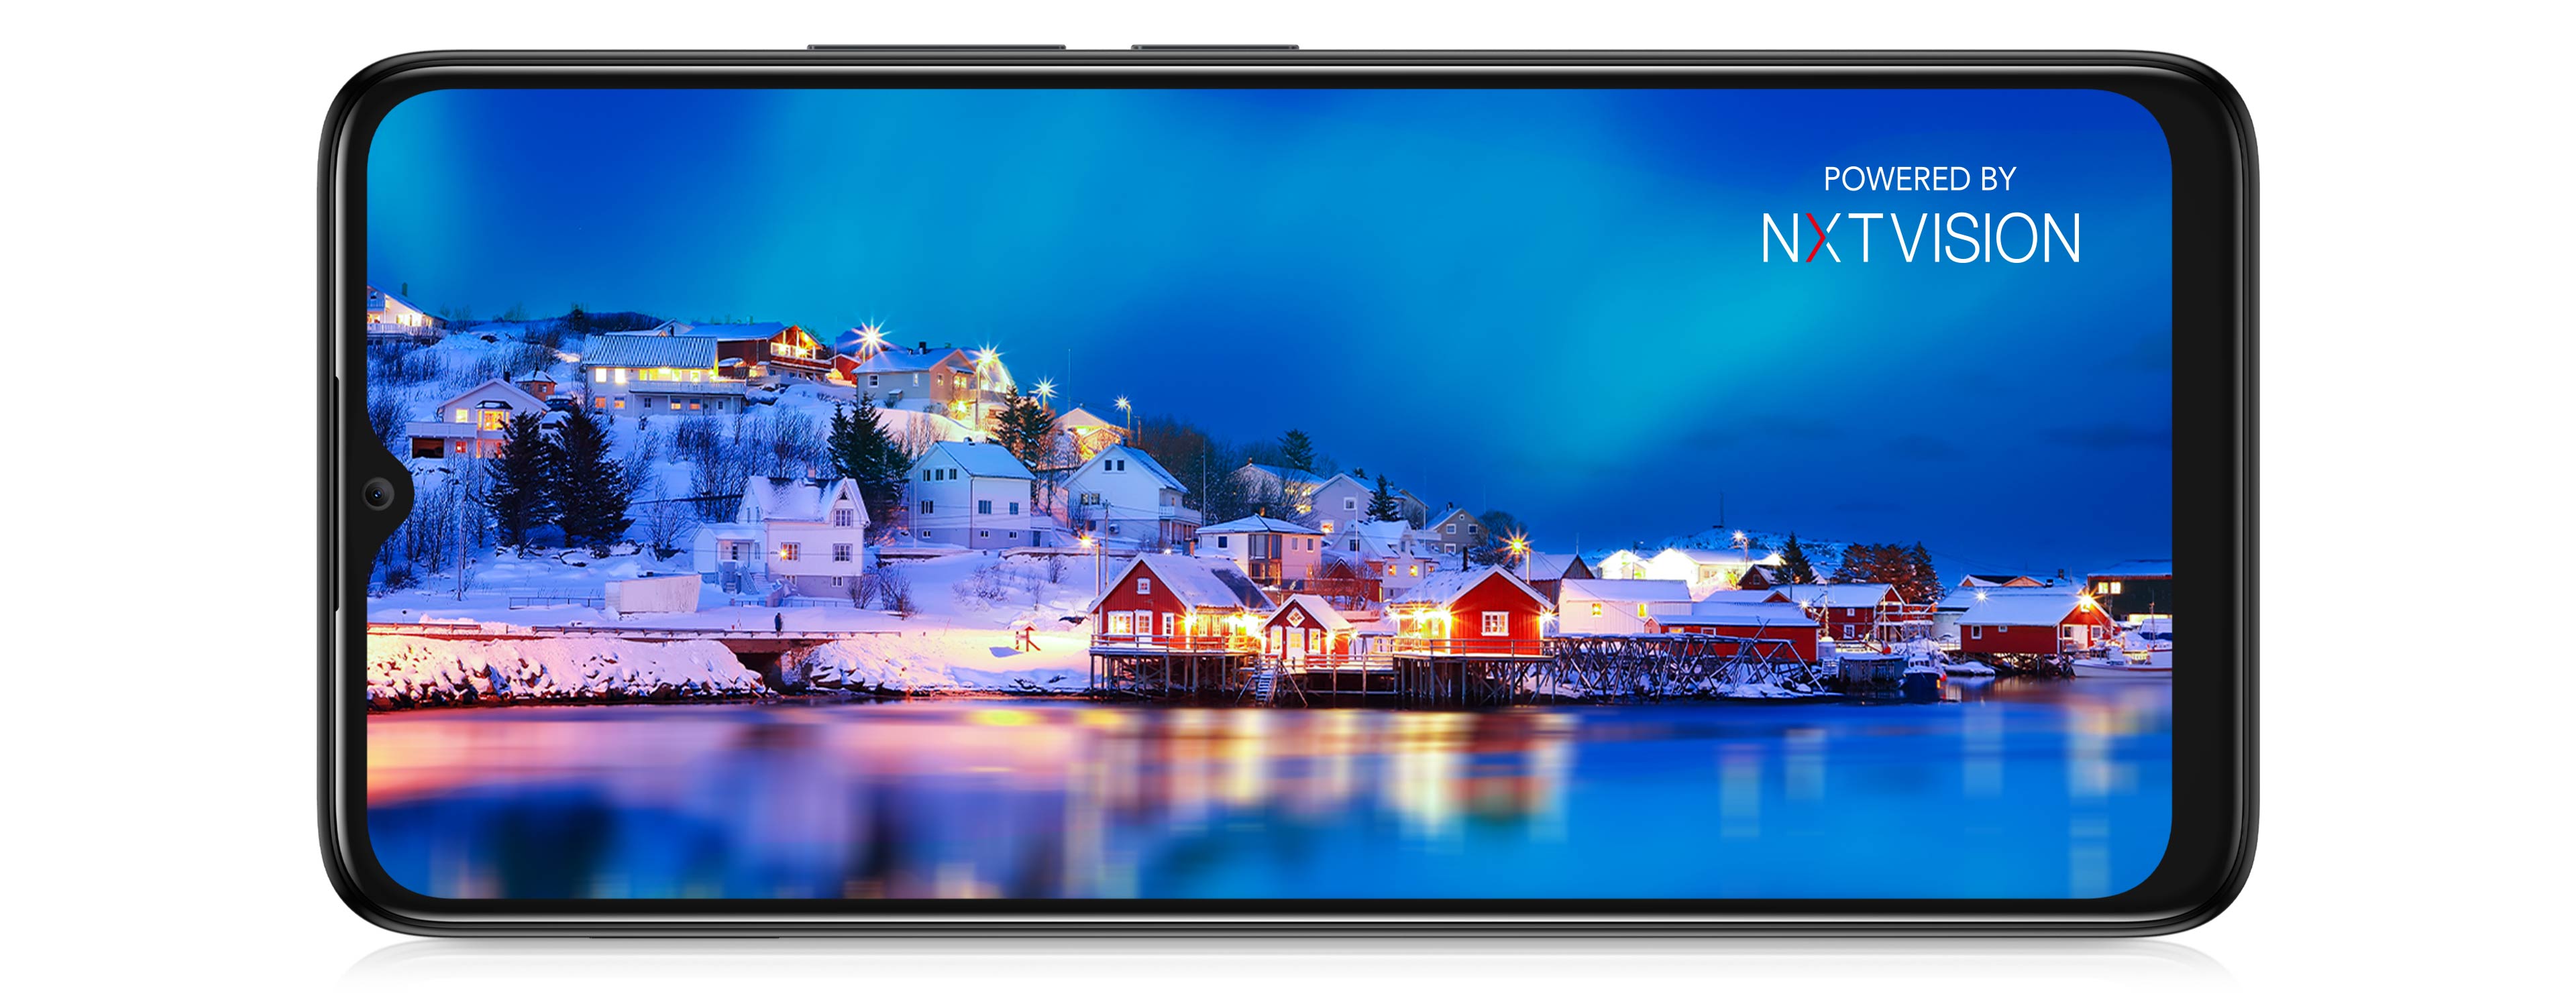 TCL 406 Smartphone 6.6" HD+ NXTVISION Display